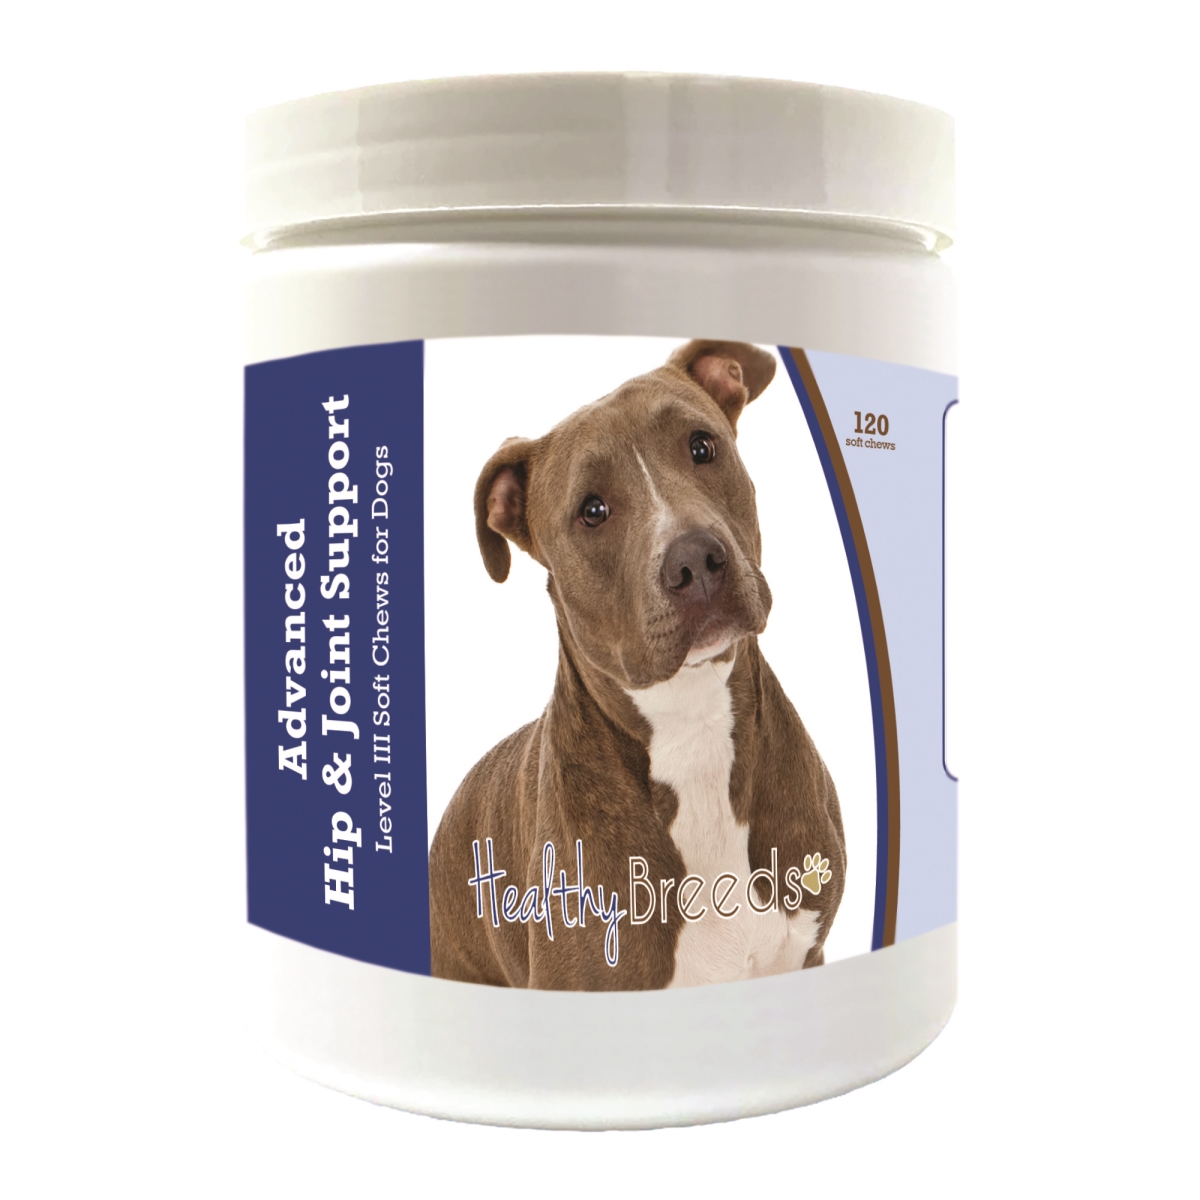 Picture of Healthy Breeds 192959898873 Pit Bull Advanced Hip & Joint Support Level III Soft Chews for Dogs